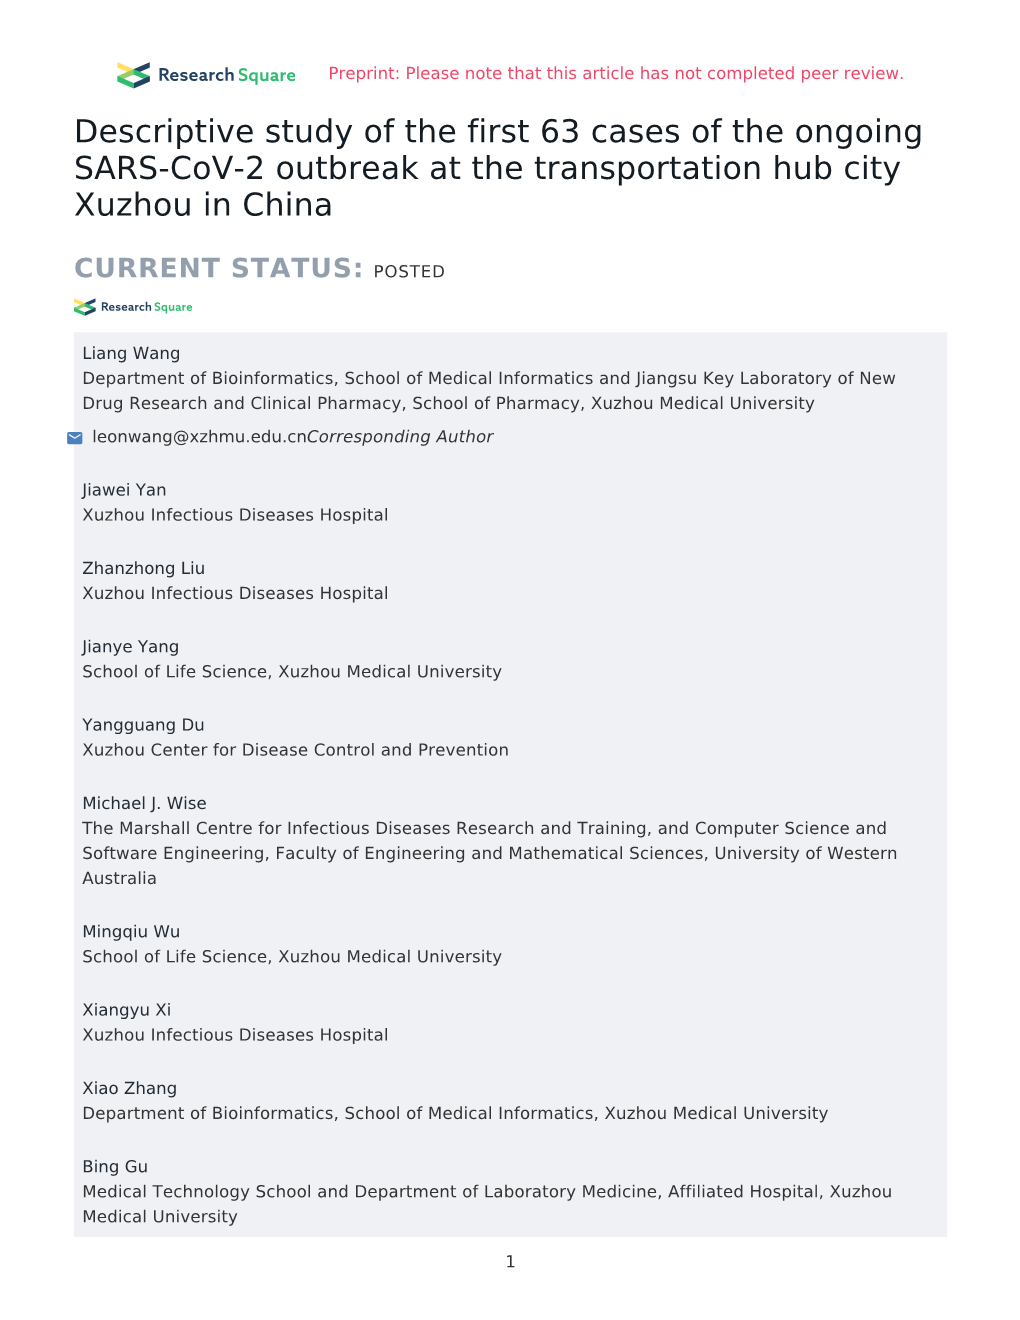 Descriptive Study of the First 63 Cases of the Ongoing SARS-Cov-2 Outbreak at the Transportation Hub City Xuzhou in China